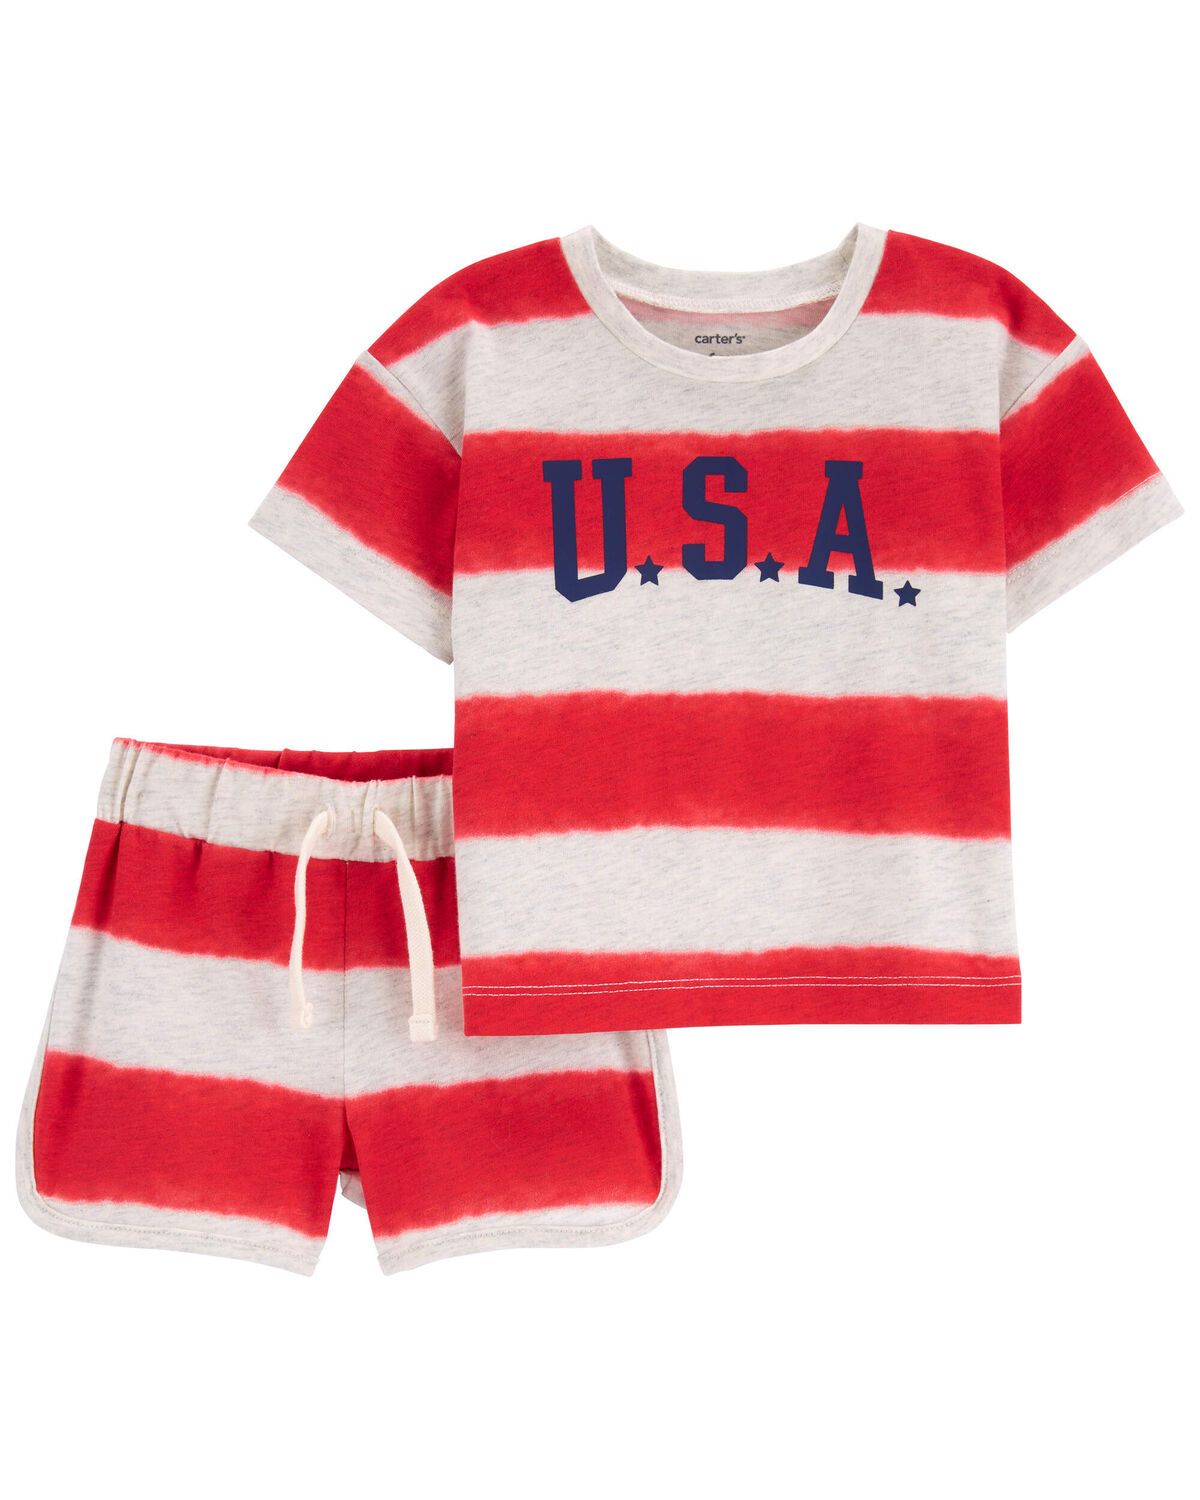 Baby 2-Piece USA Striped Outfit Set | Carter's